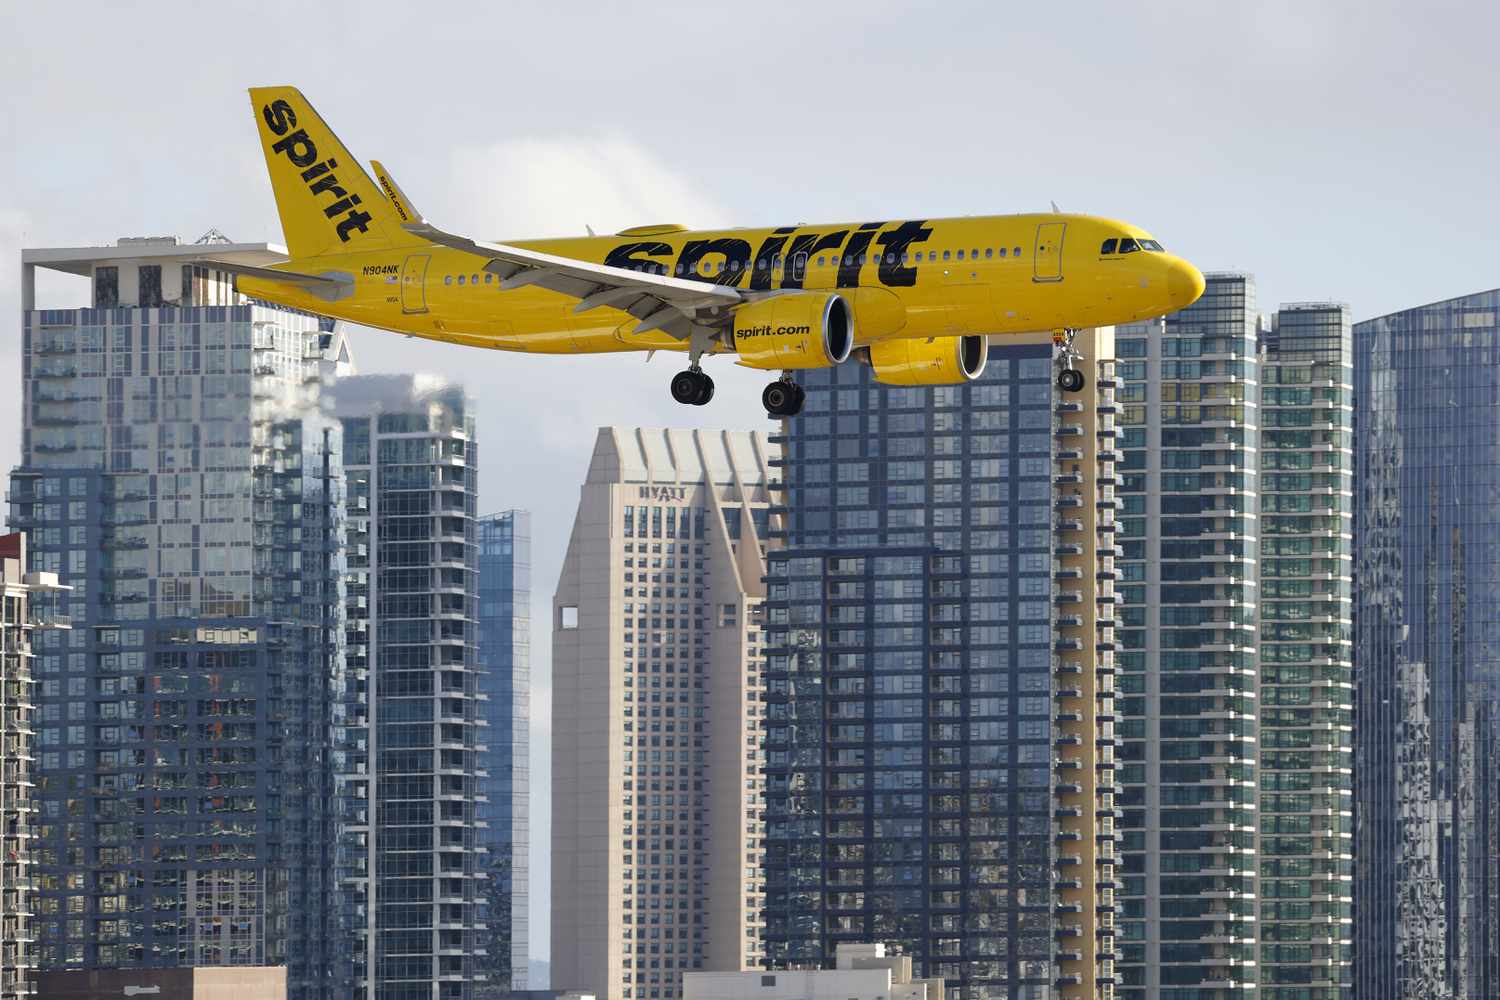 Spirit Airlines Cuts Costs Why 260 Pilots Are Losing Jobs and New Planes Delayed Till 2030-